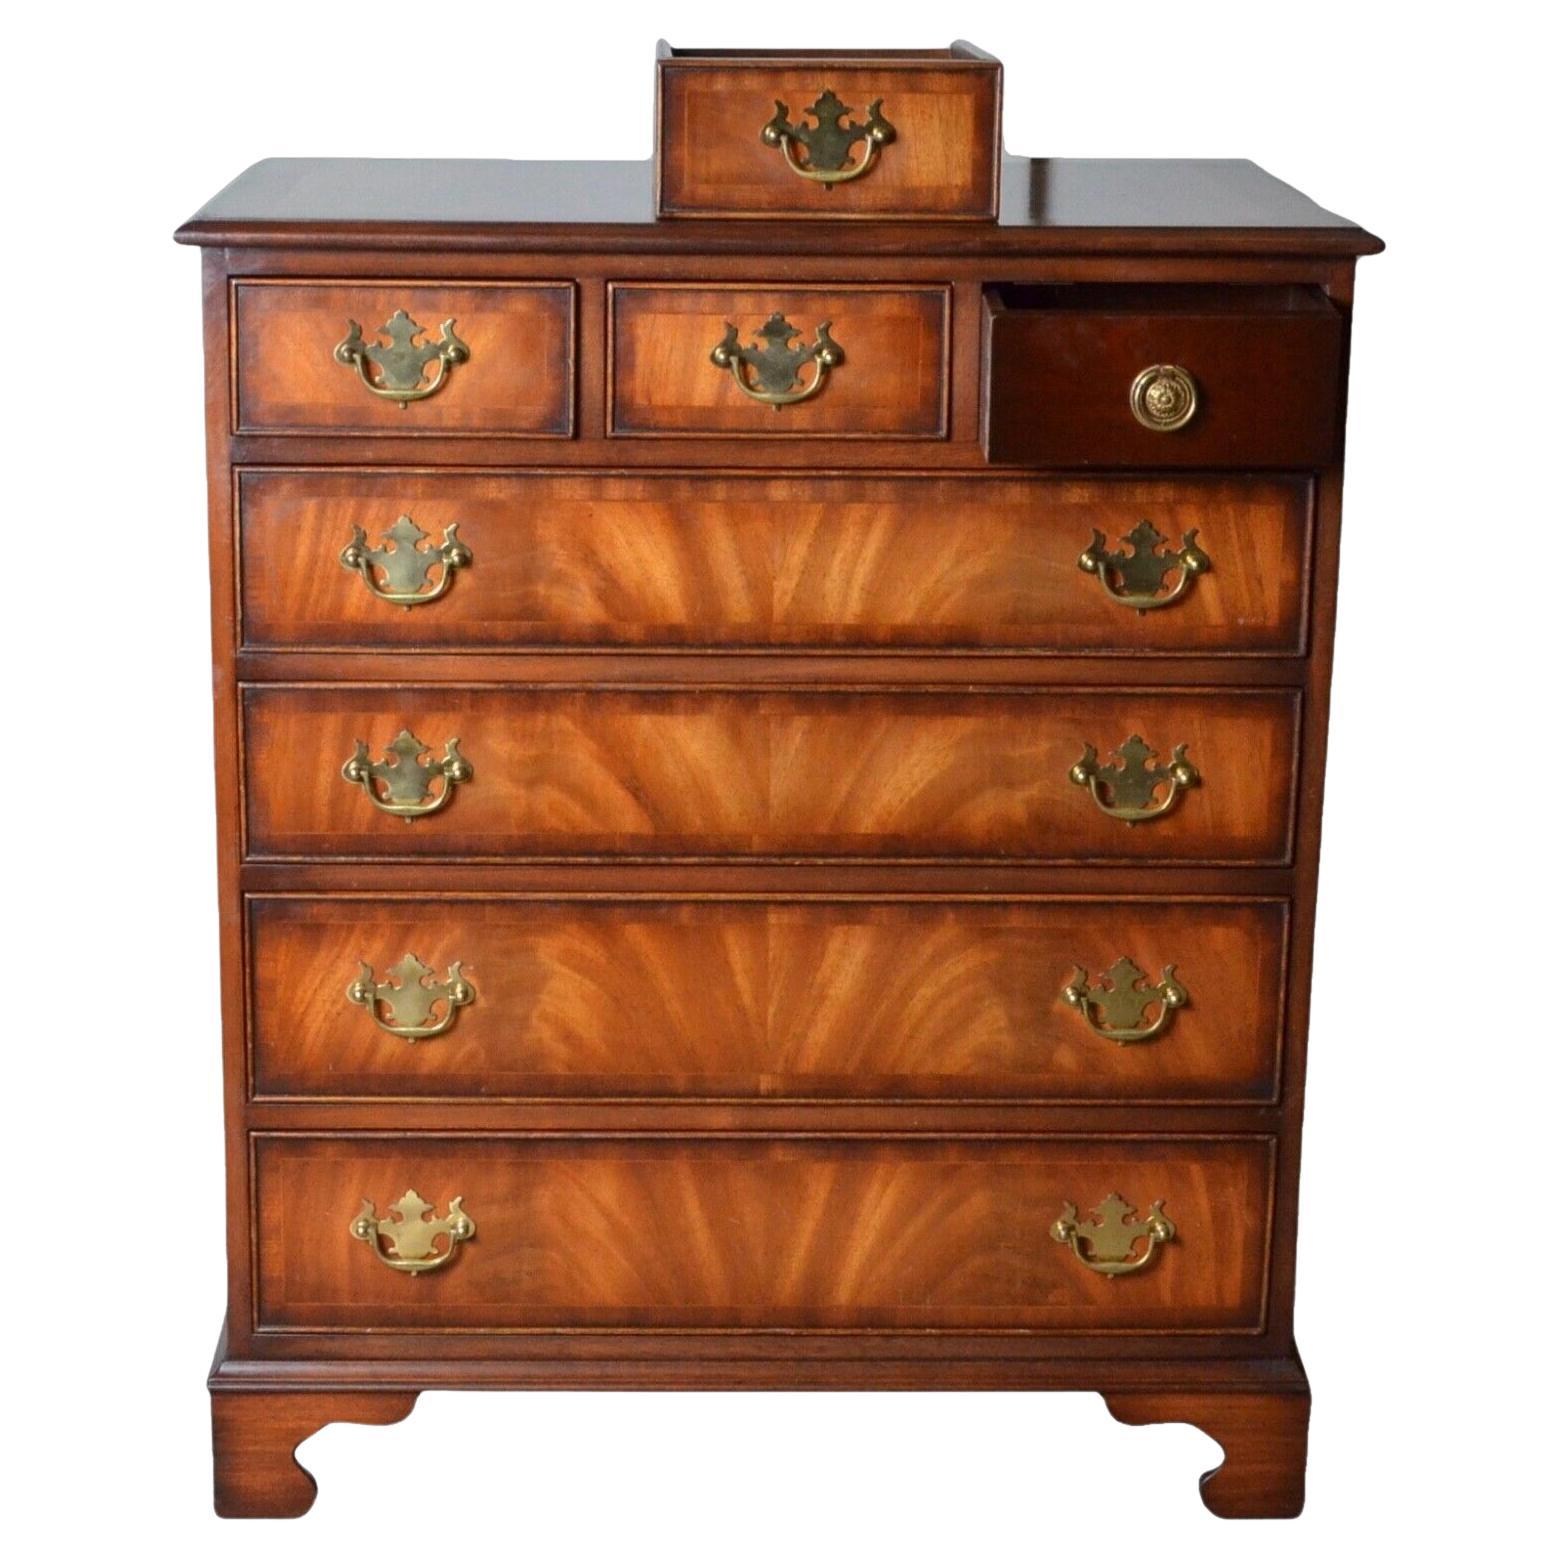 Lovely Antique Georgian Hardwood Chest of Drawers with a Hidden Drawer For Sale